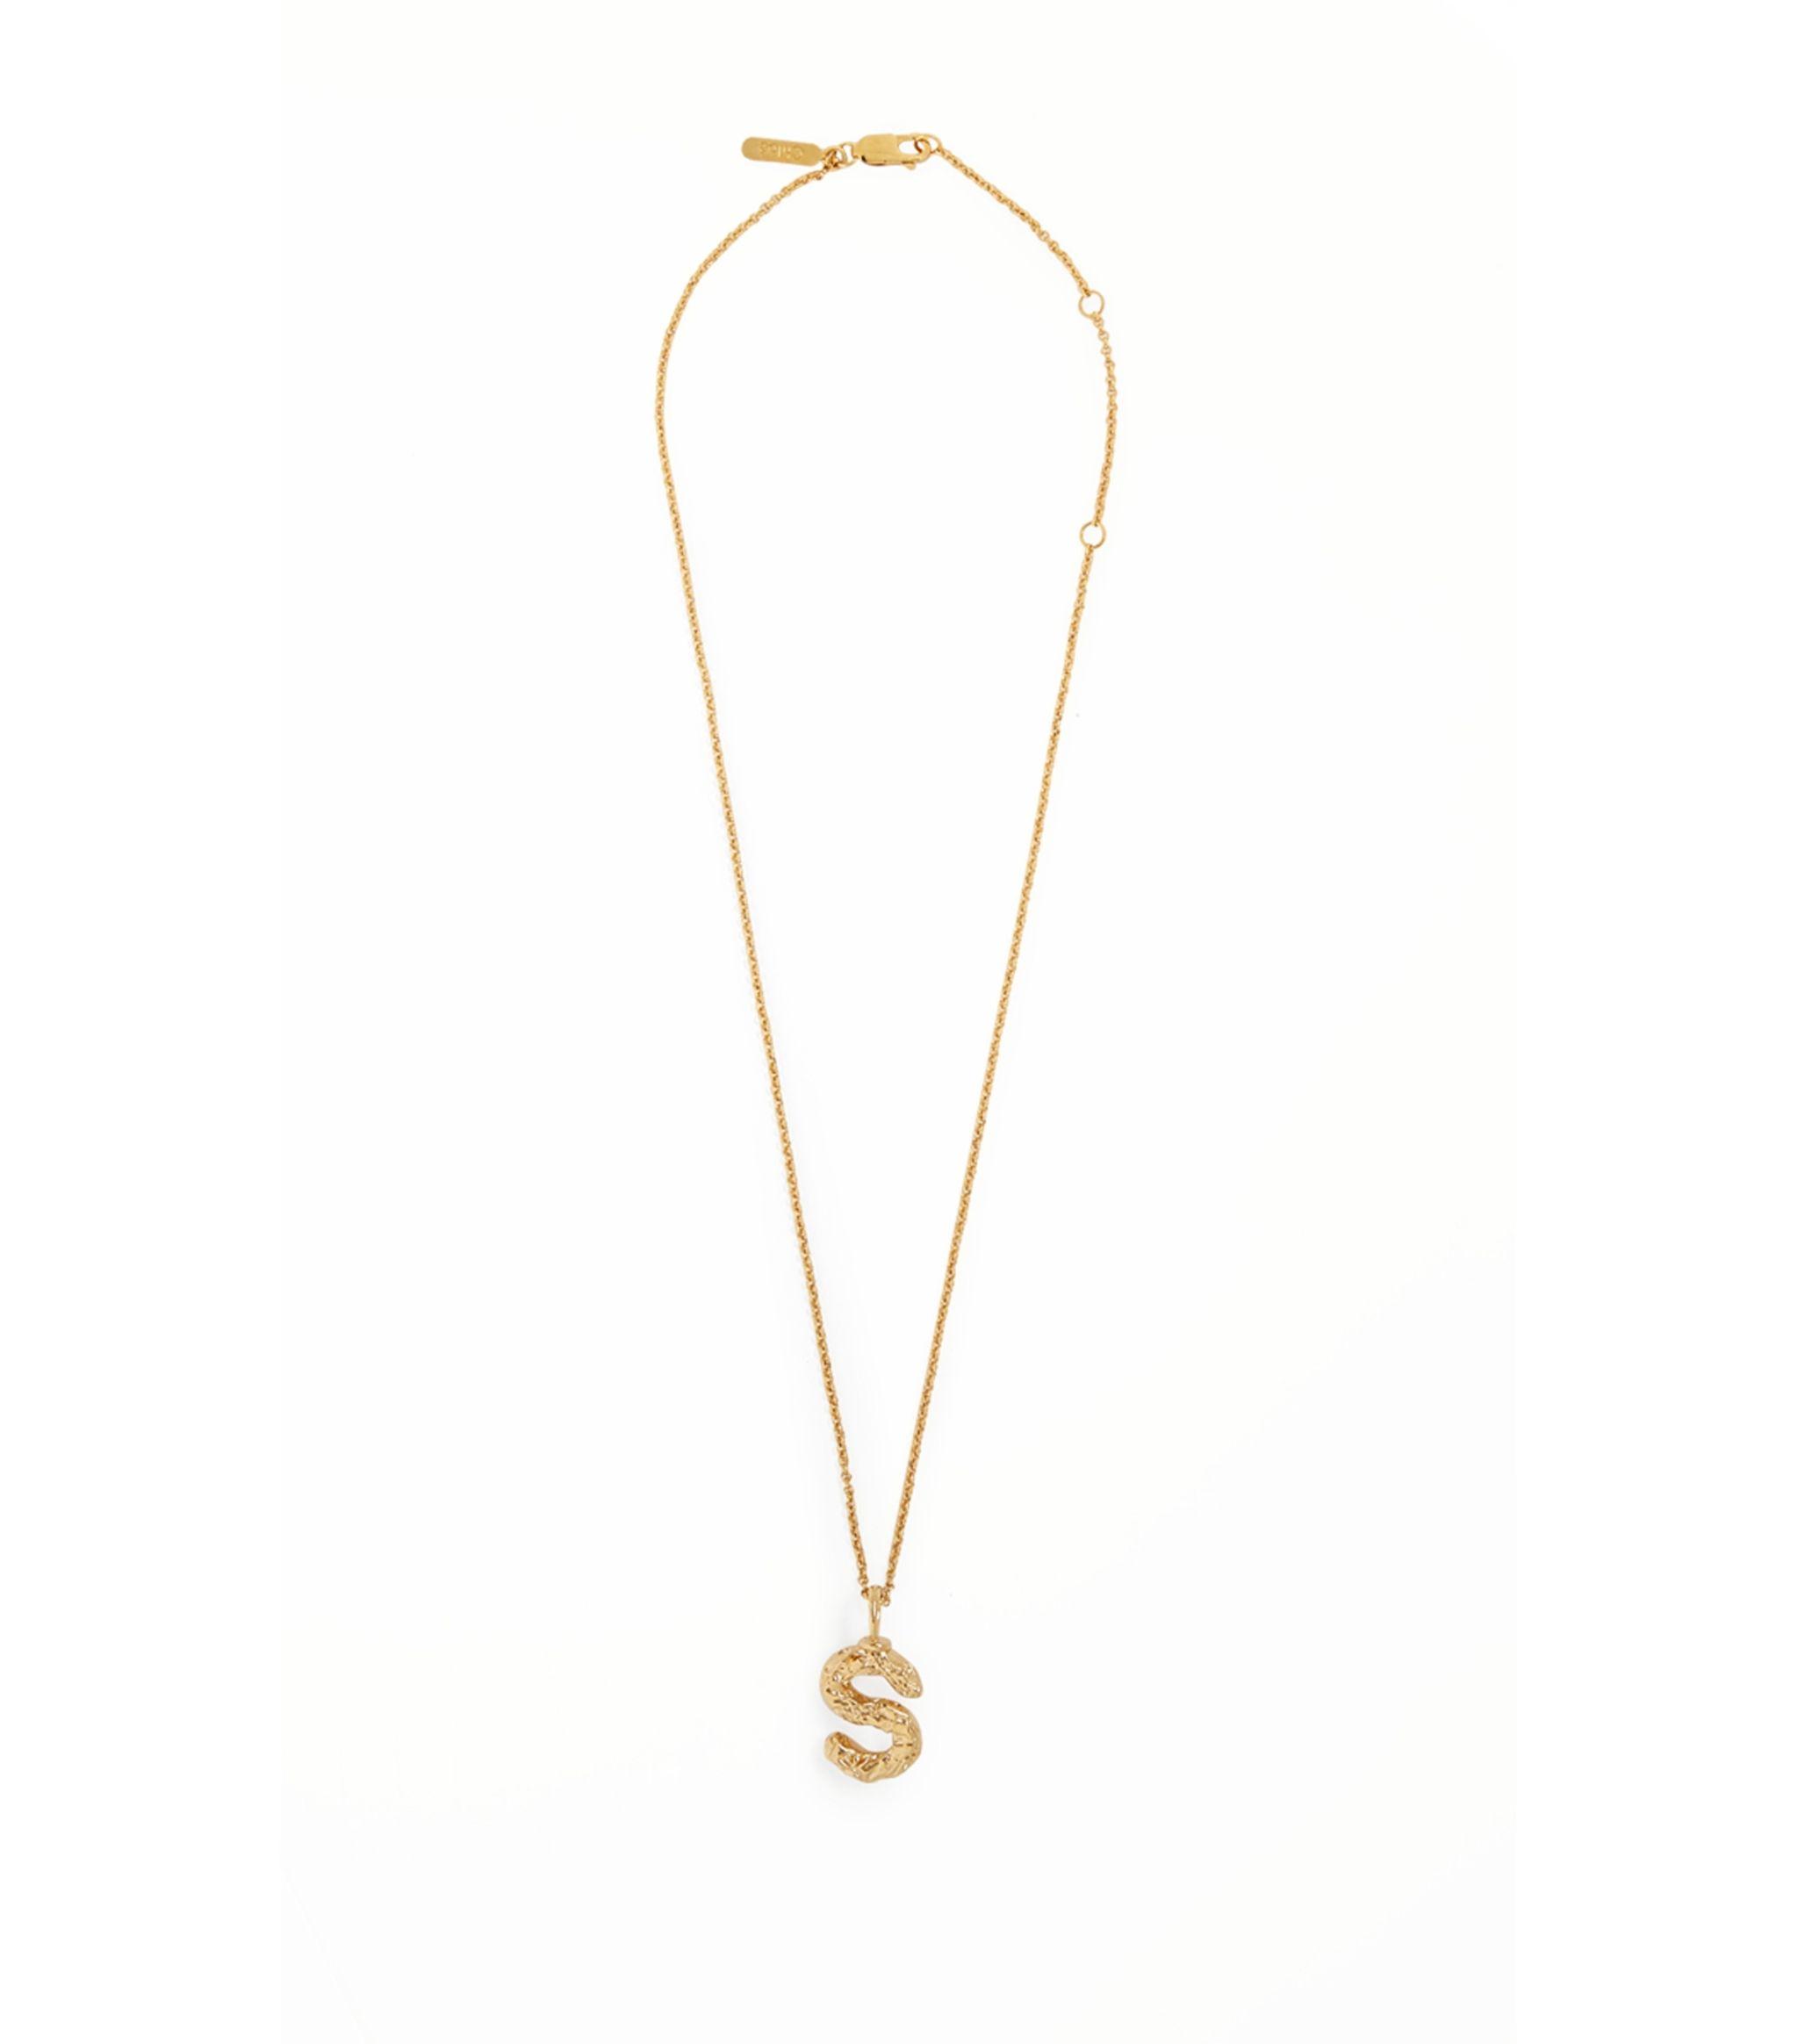 Chloé Hinged Alphabet Necklace in Gold (Metallic) - Save 2% - Lyst